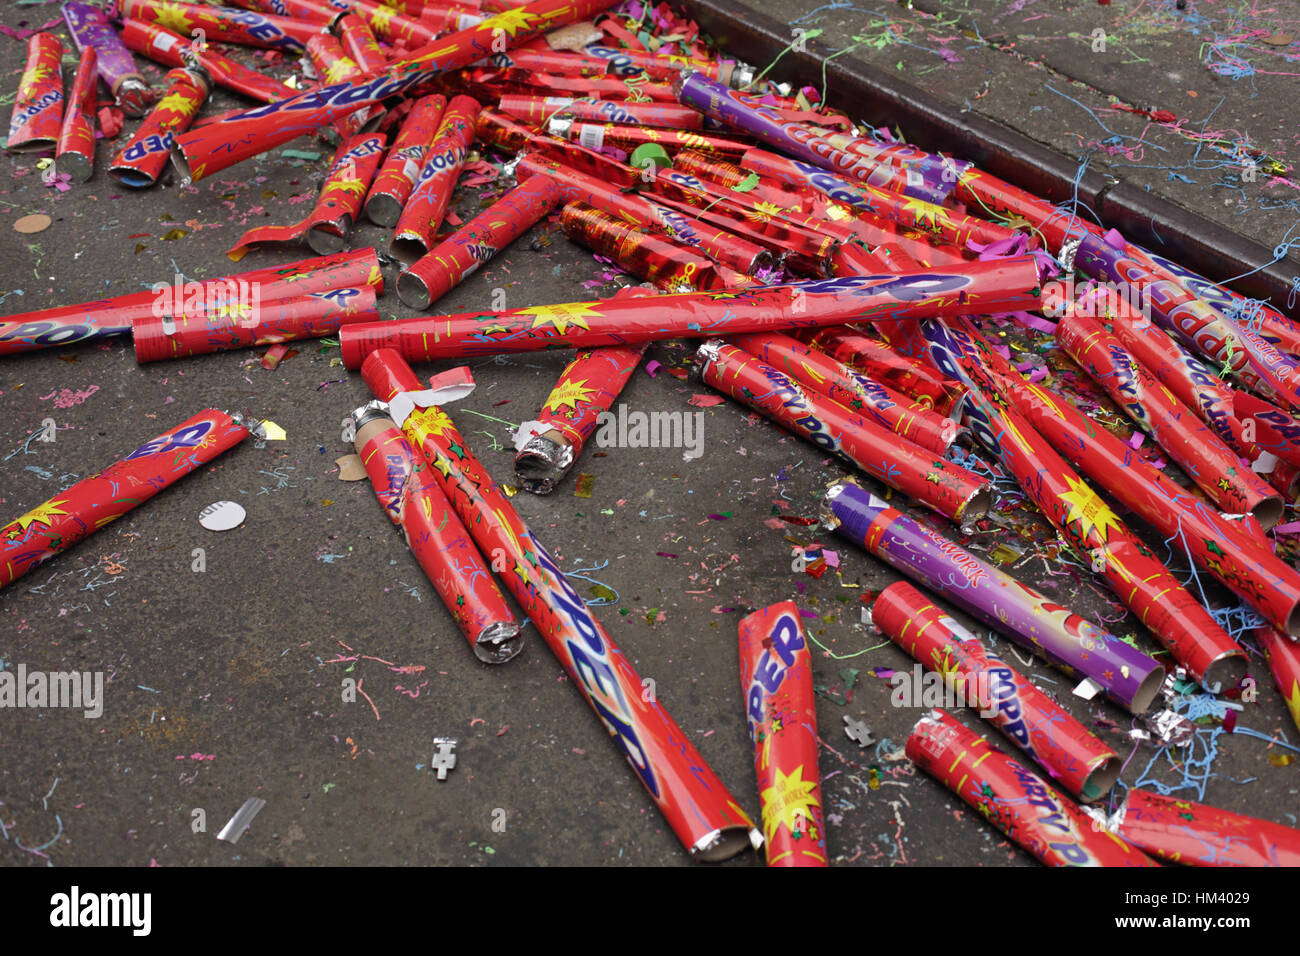 Spent giant party poppers, confetti and glitter litter a NYC Chinatown street on the first day of the Chinese New Year Stock Photo